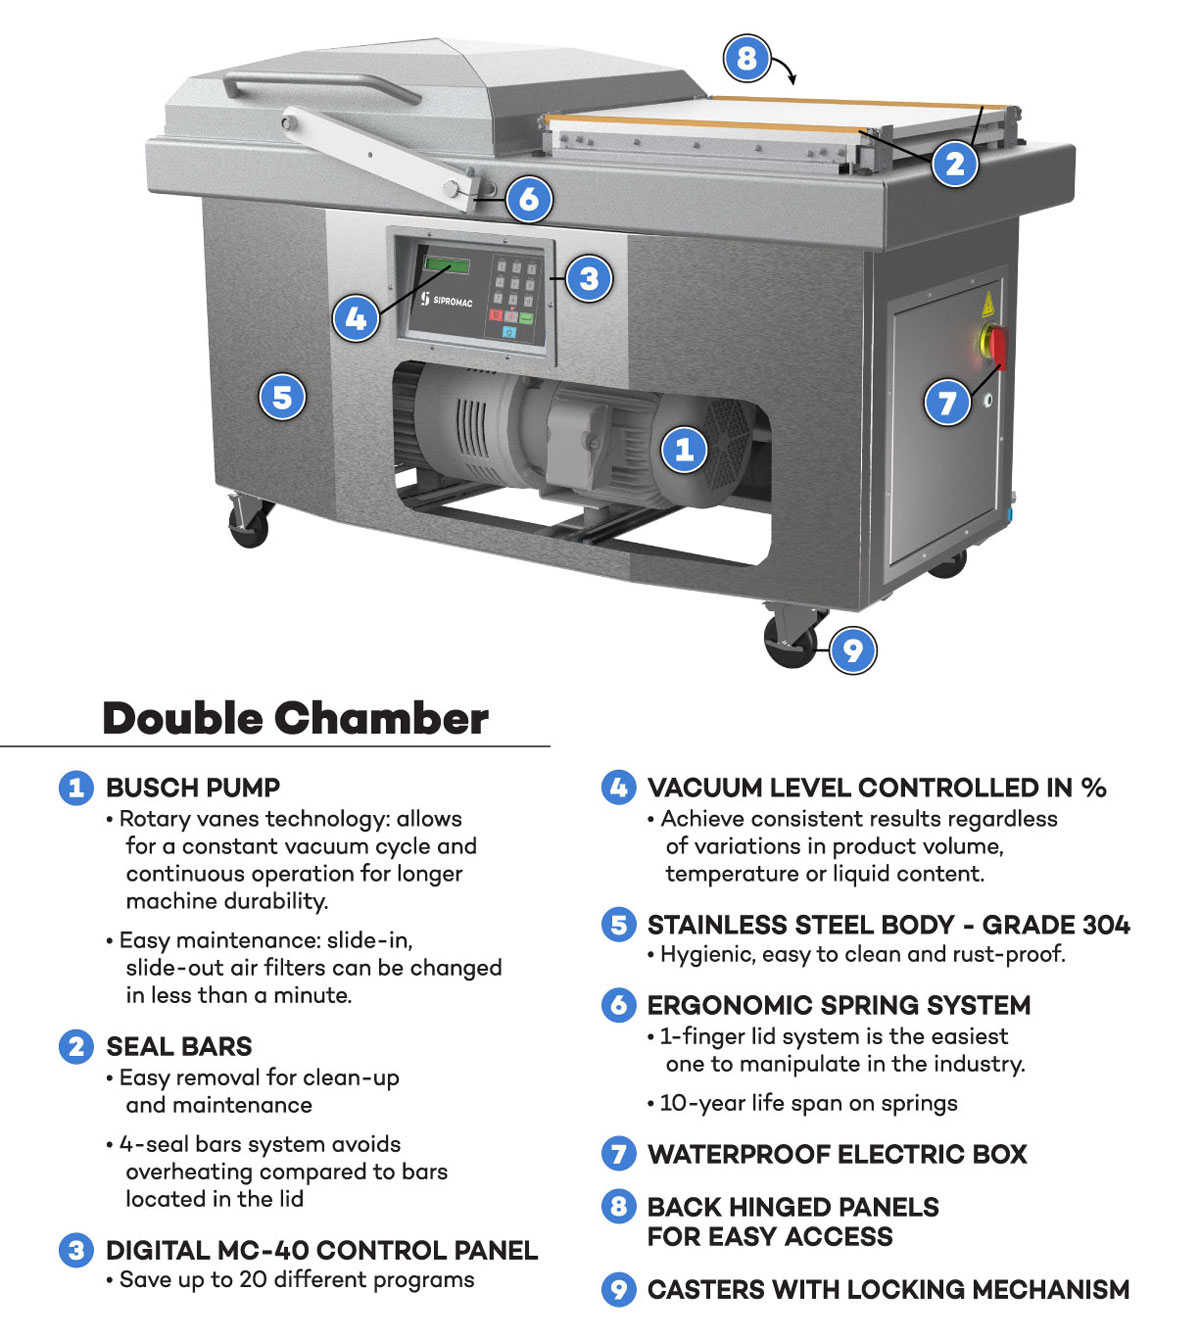 CHDC-860 - Double Chamber Sealers